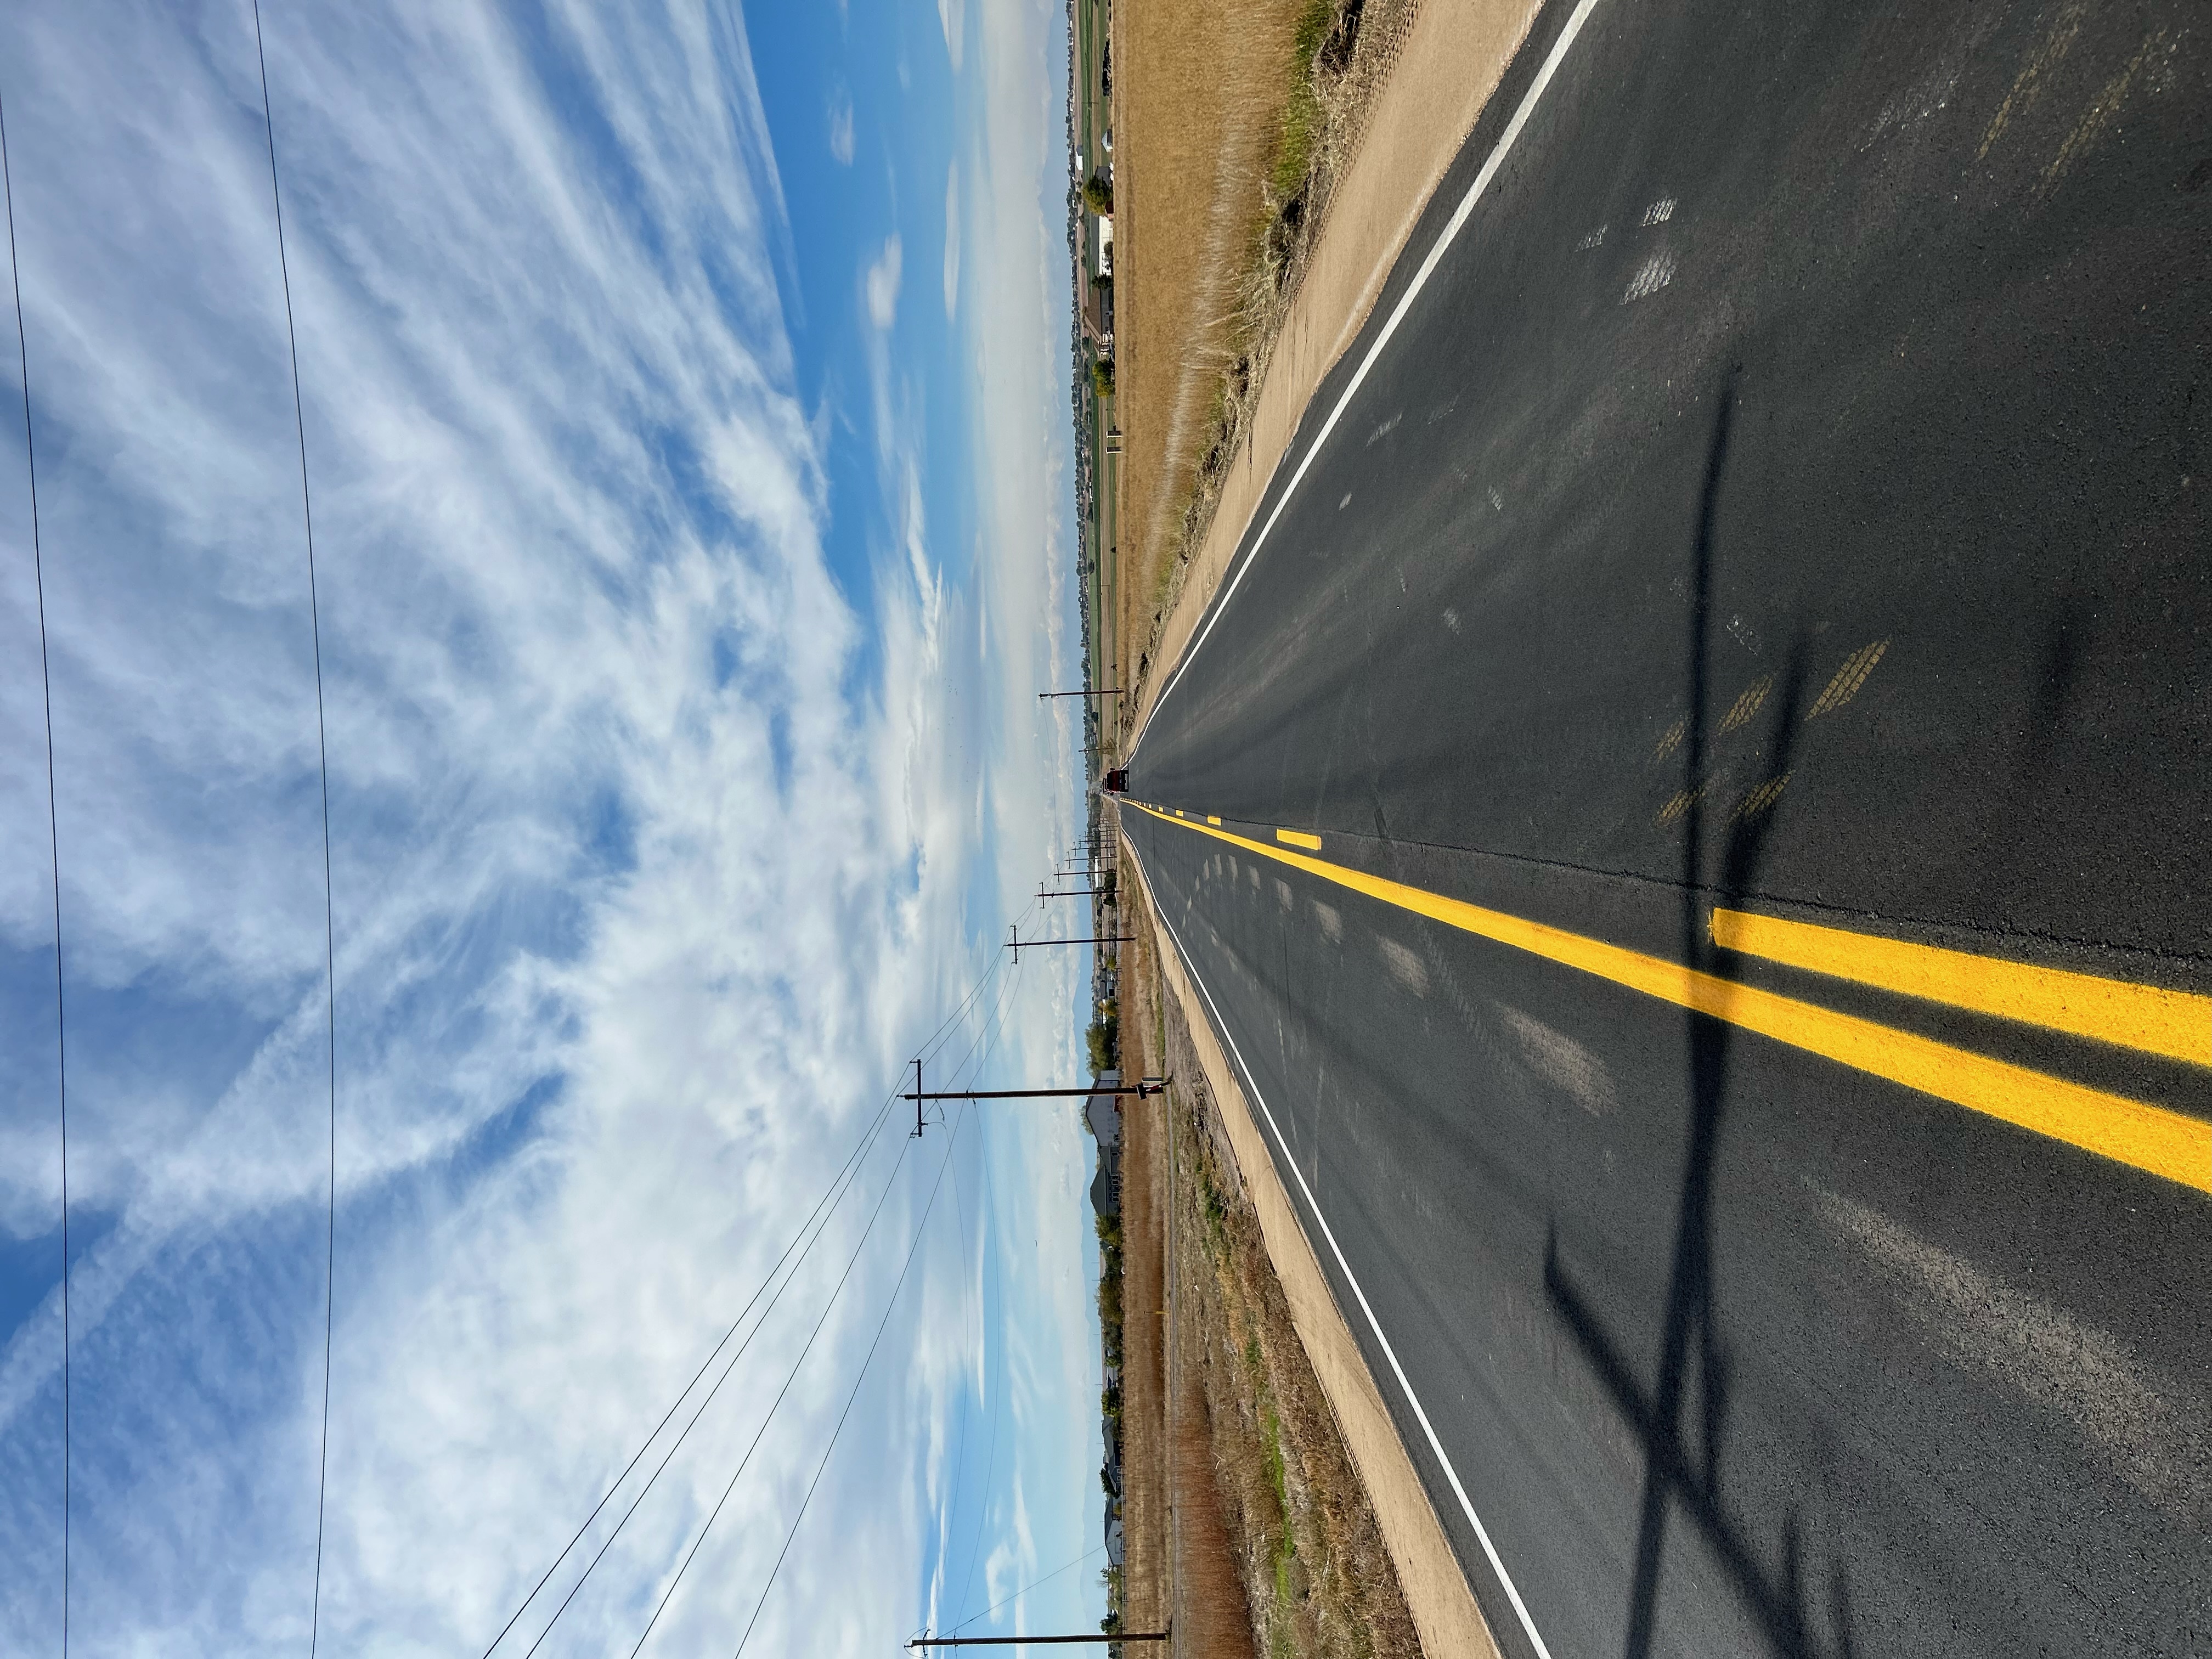 Pecos St. Widening Project